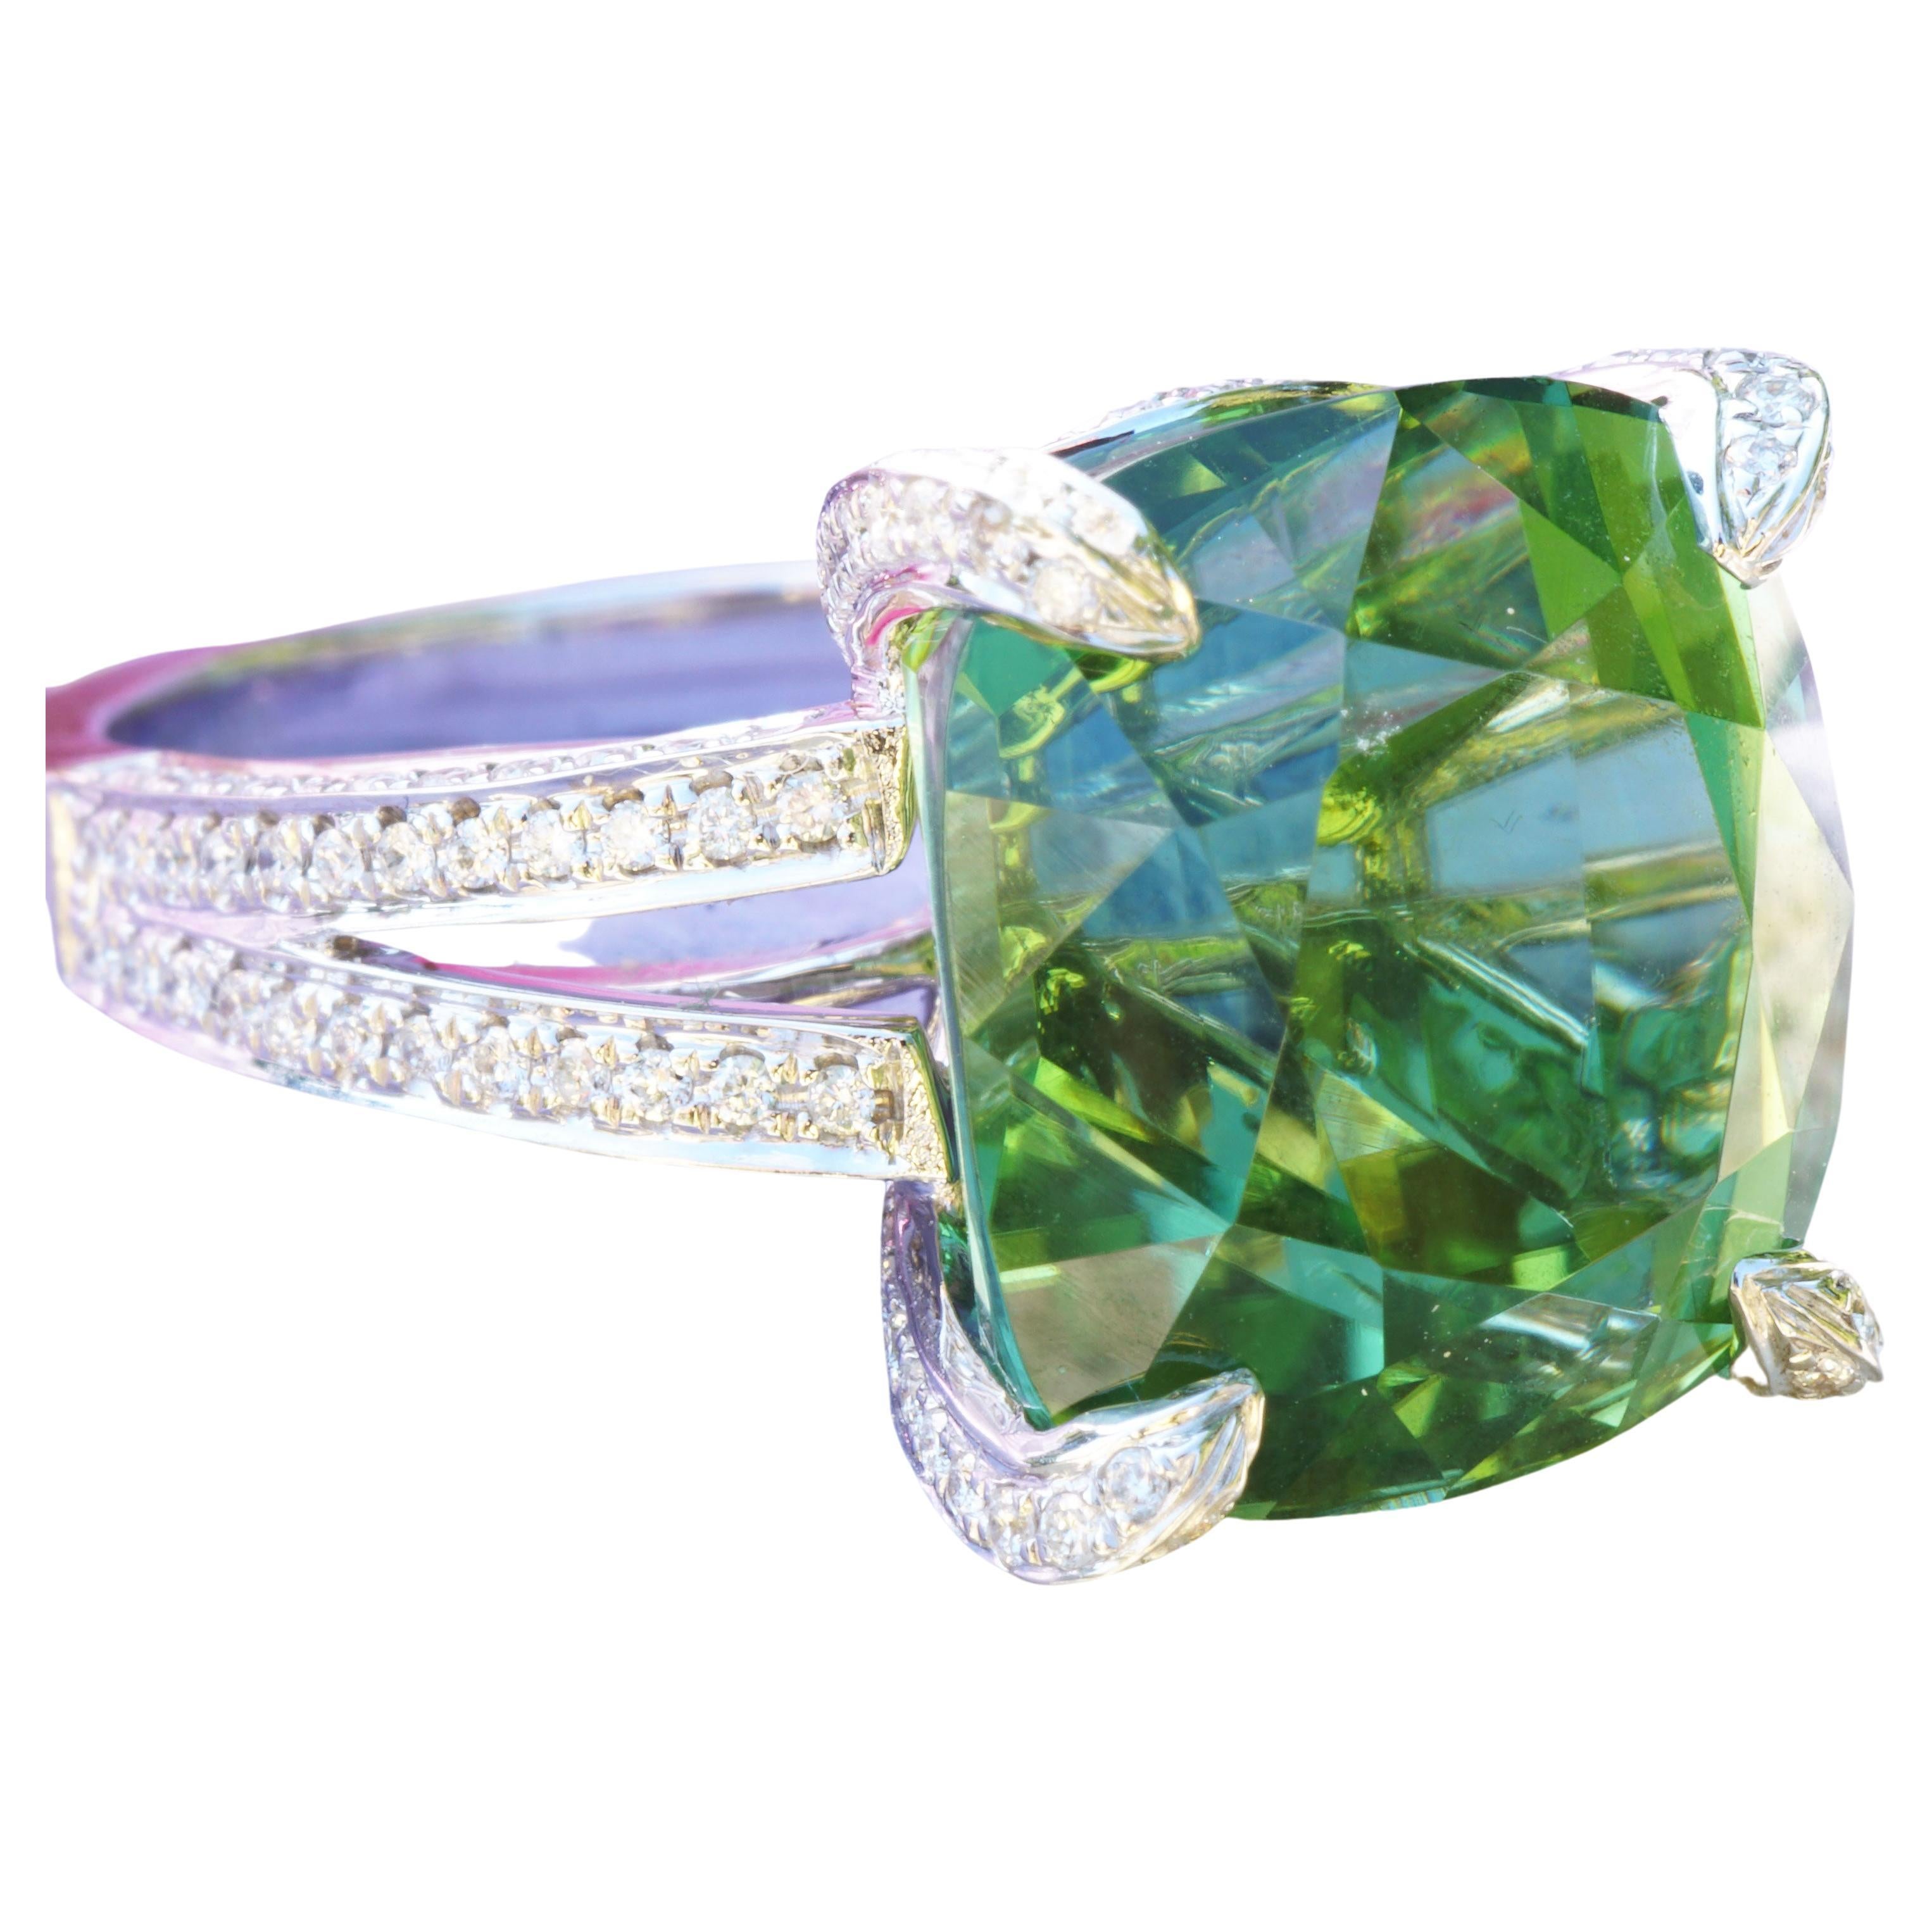 Antique Cushion Cut Magnific 14.64ct Green Mint Tourmaline Ring Loupe Clean with Diamonds Investment